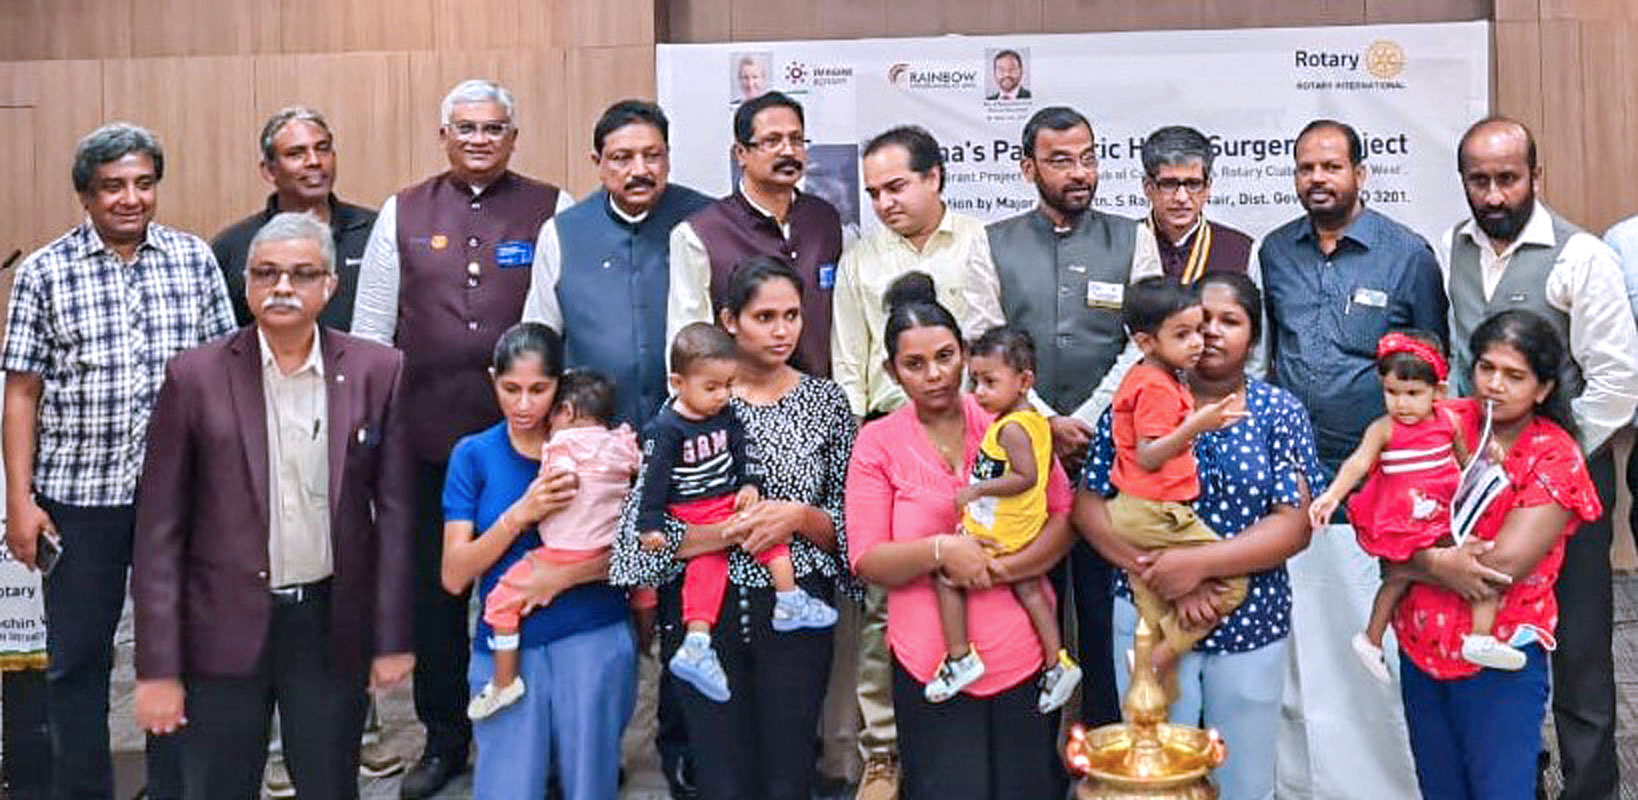 Sri Lankan children with their parents, along with DG Rajmohan Nair and Rotarians of RC Cochin West, at the hospital in Kochi after the CHD surgery. PDG Madhav Chandran is on the right.